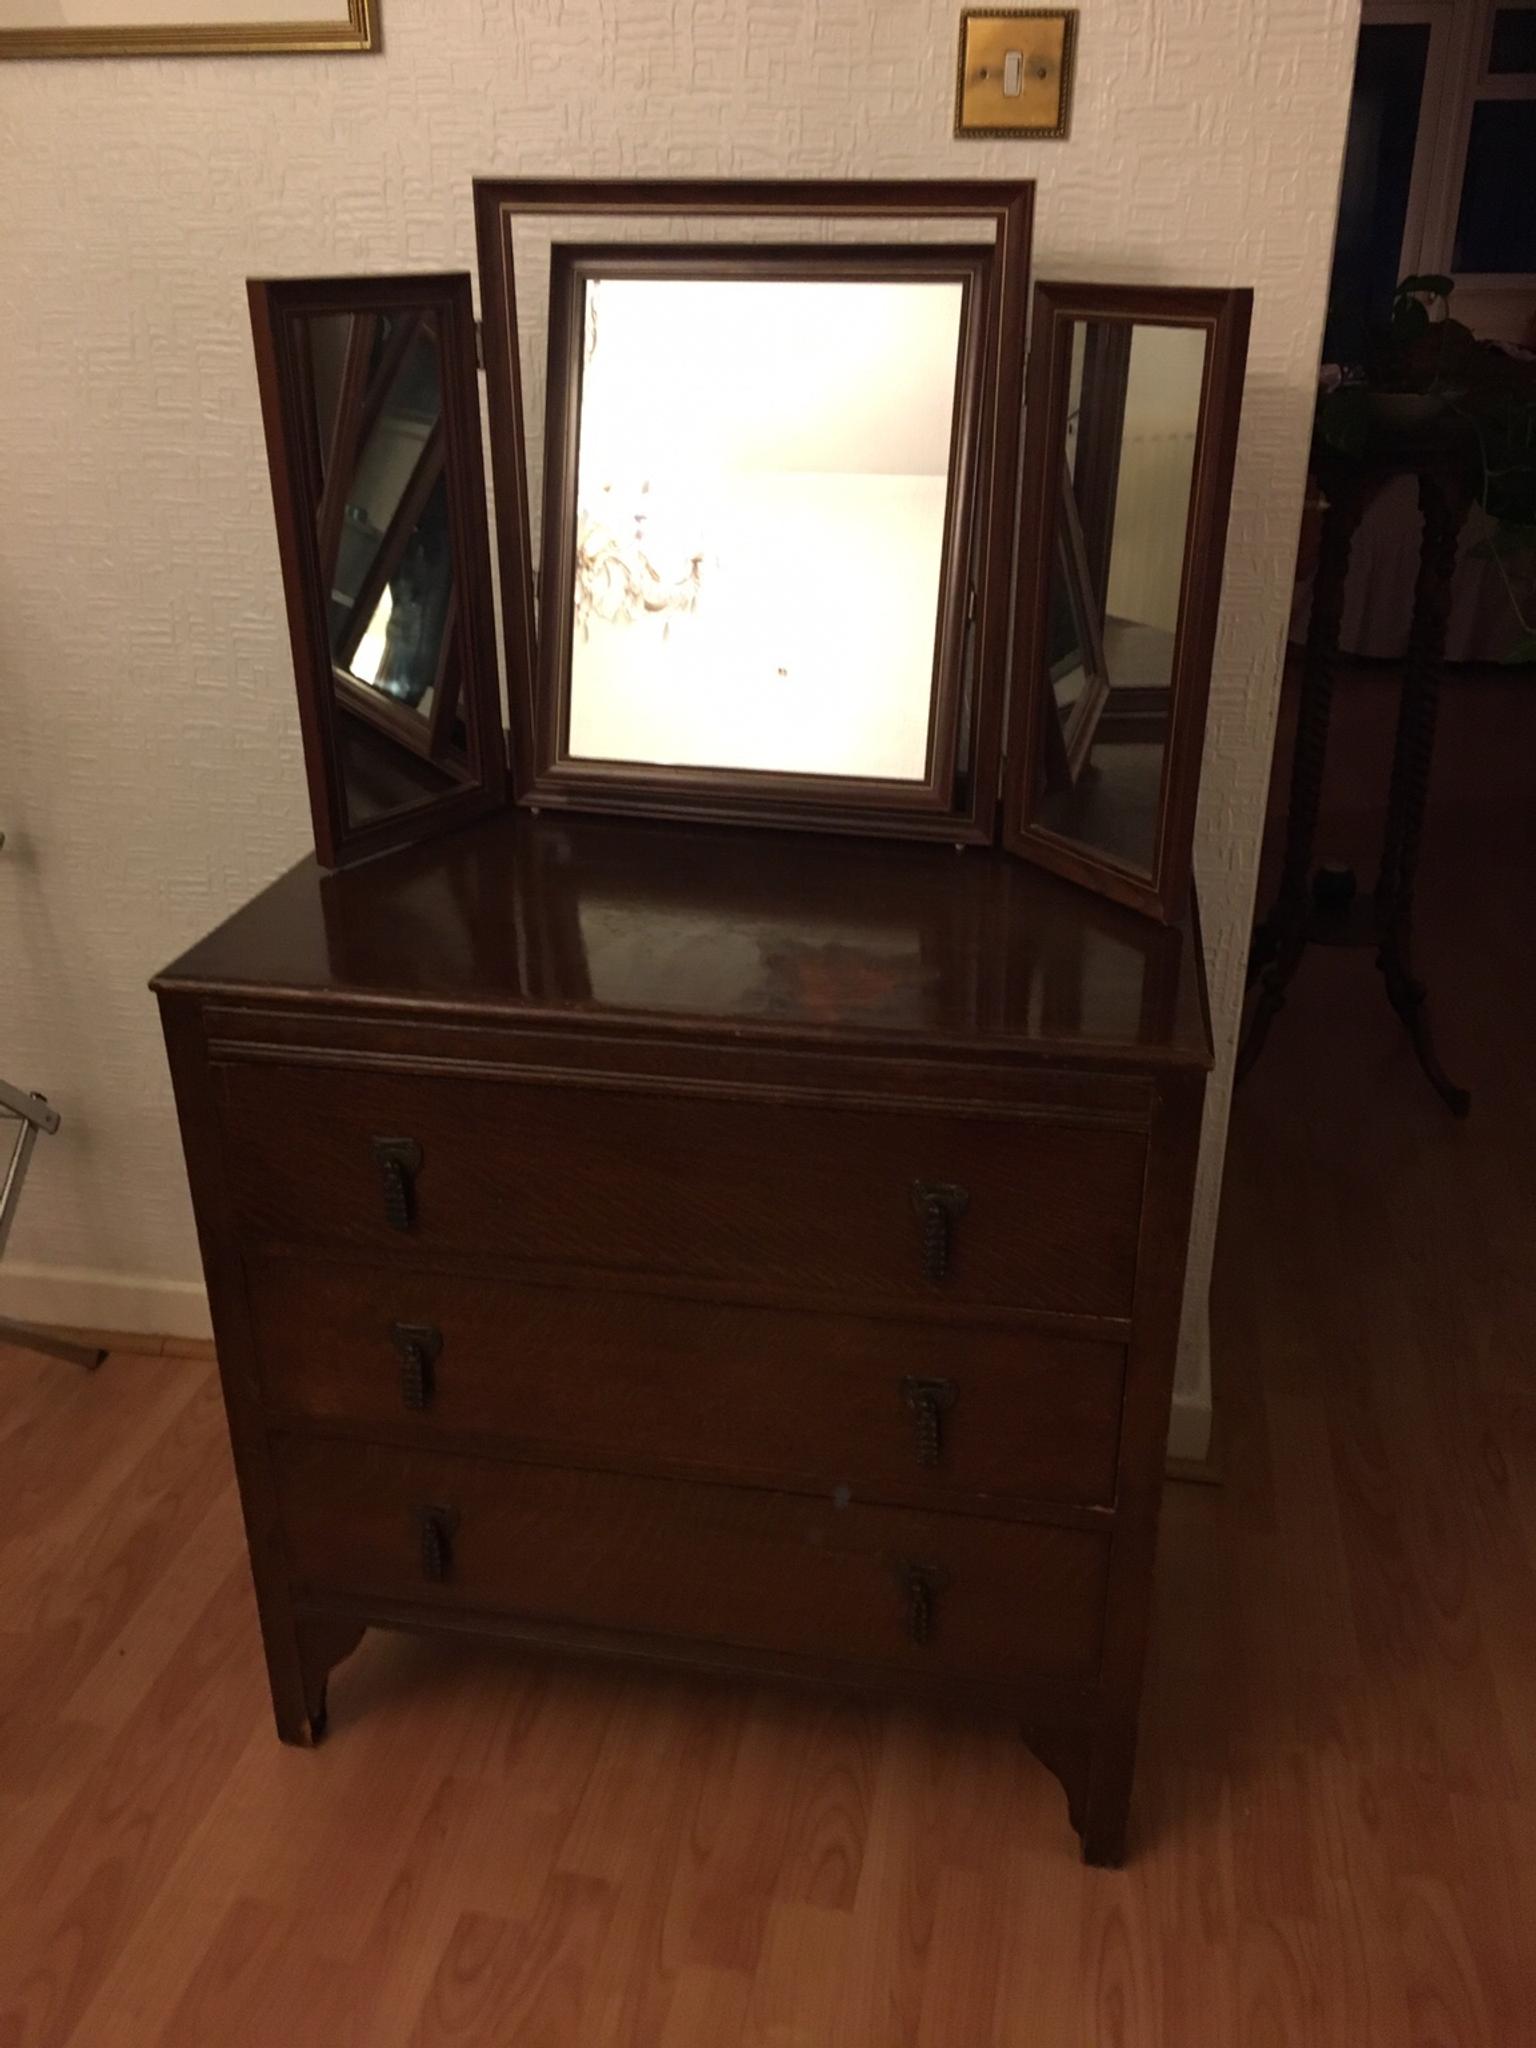 Wooden Dresser With Stand Alone Mirror In Oakengates Fur 30 00